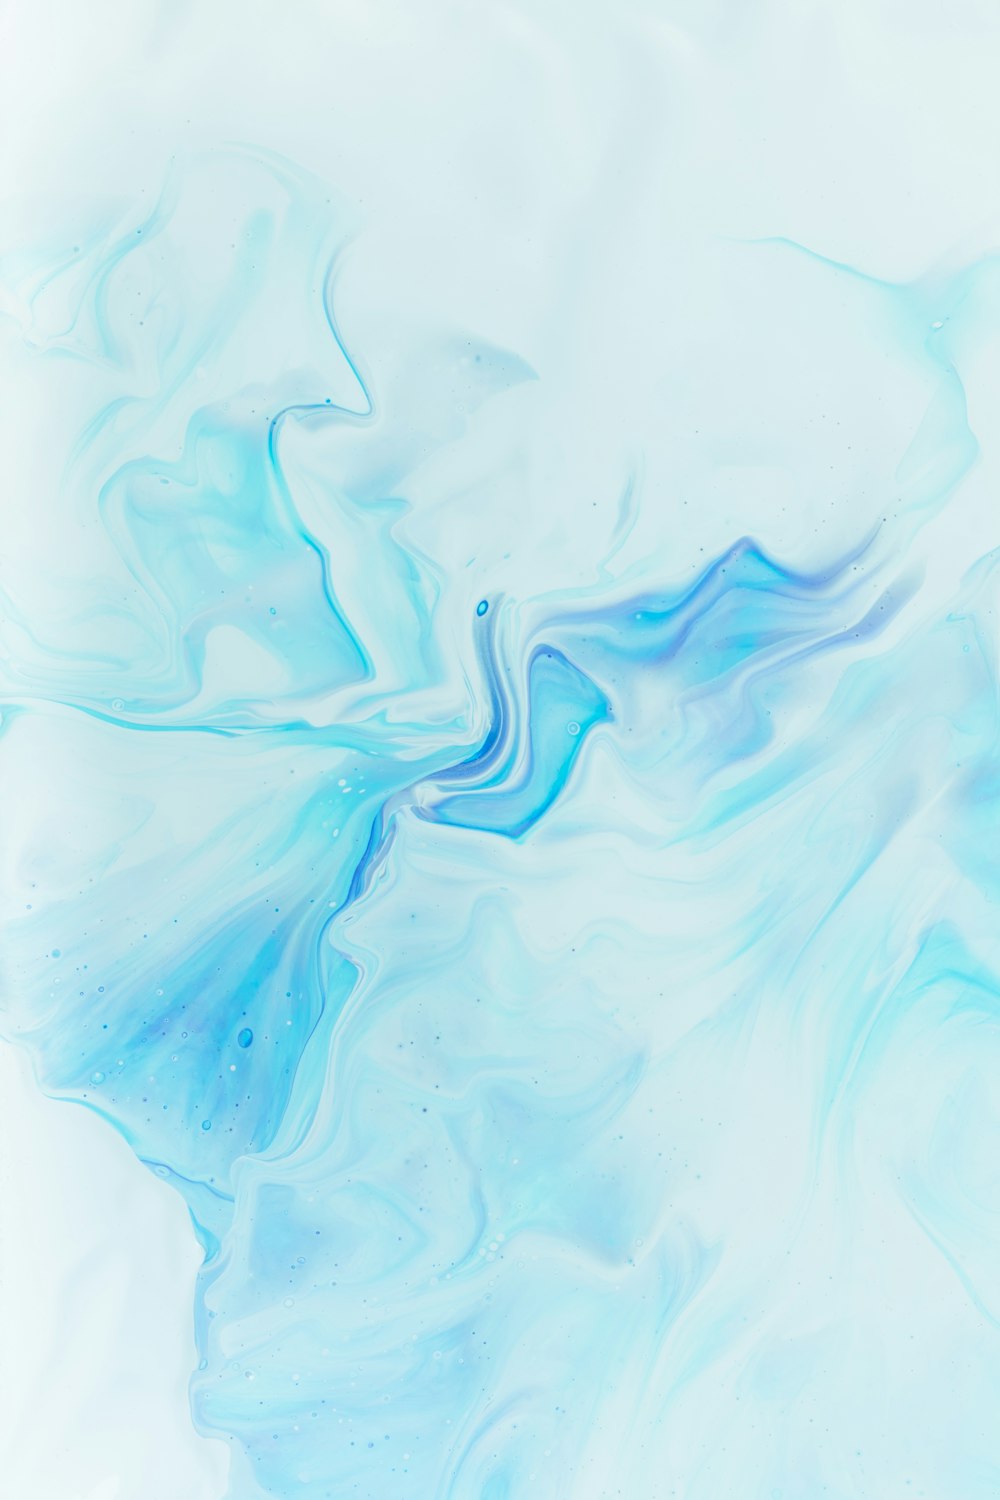 999+ Blue Abstract Pictures | Download Free Images on Unsplash